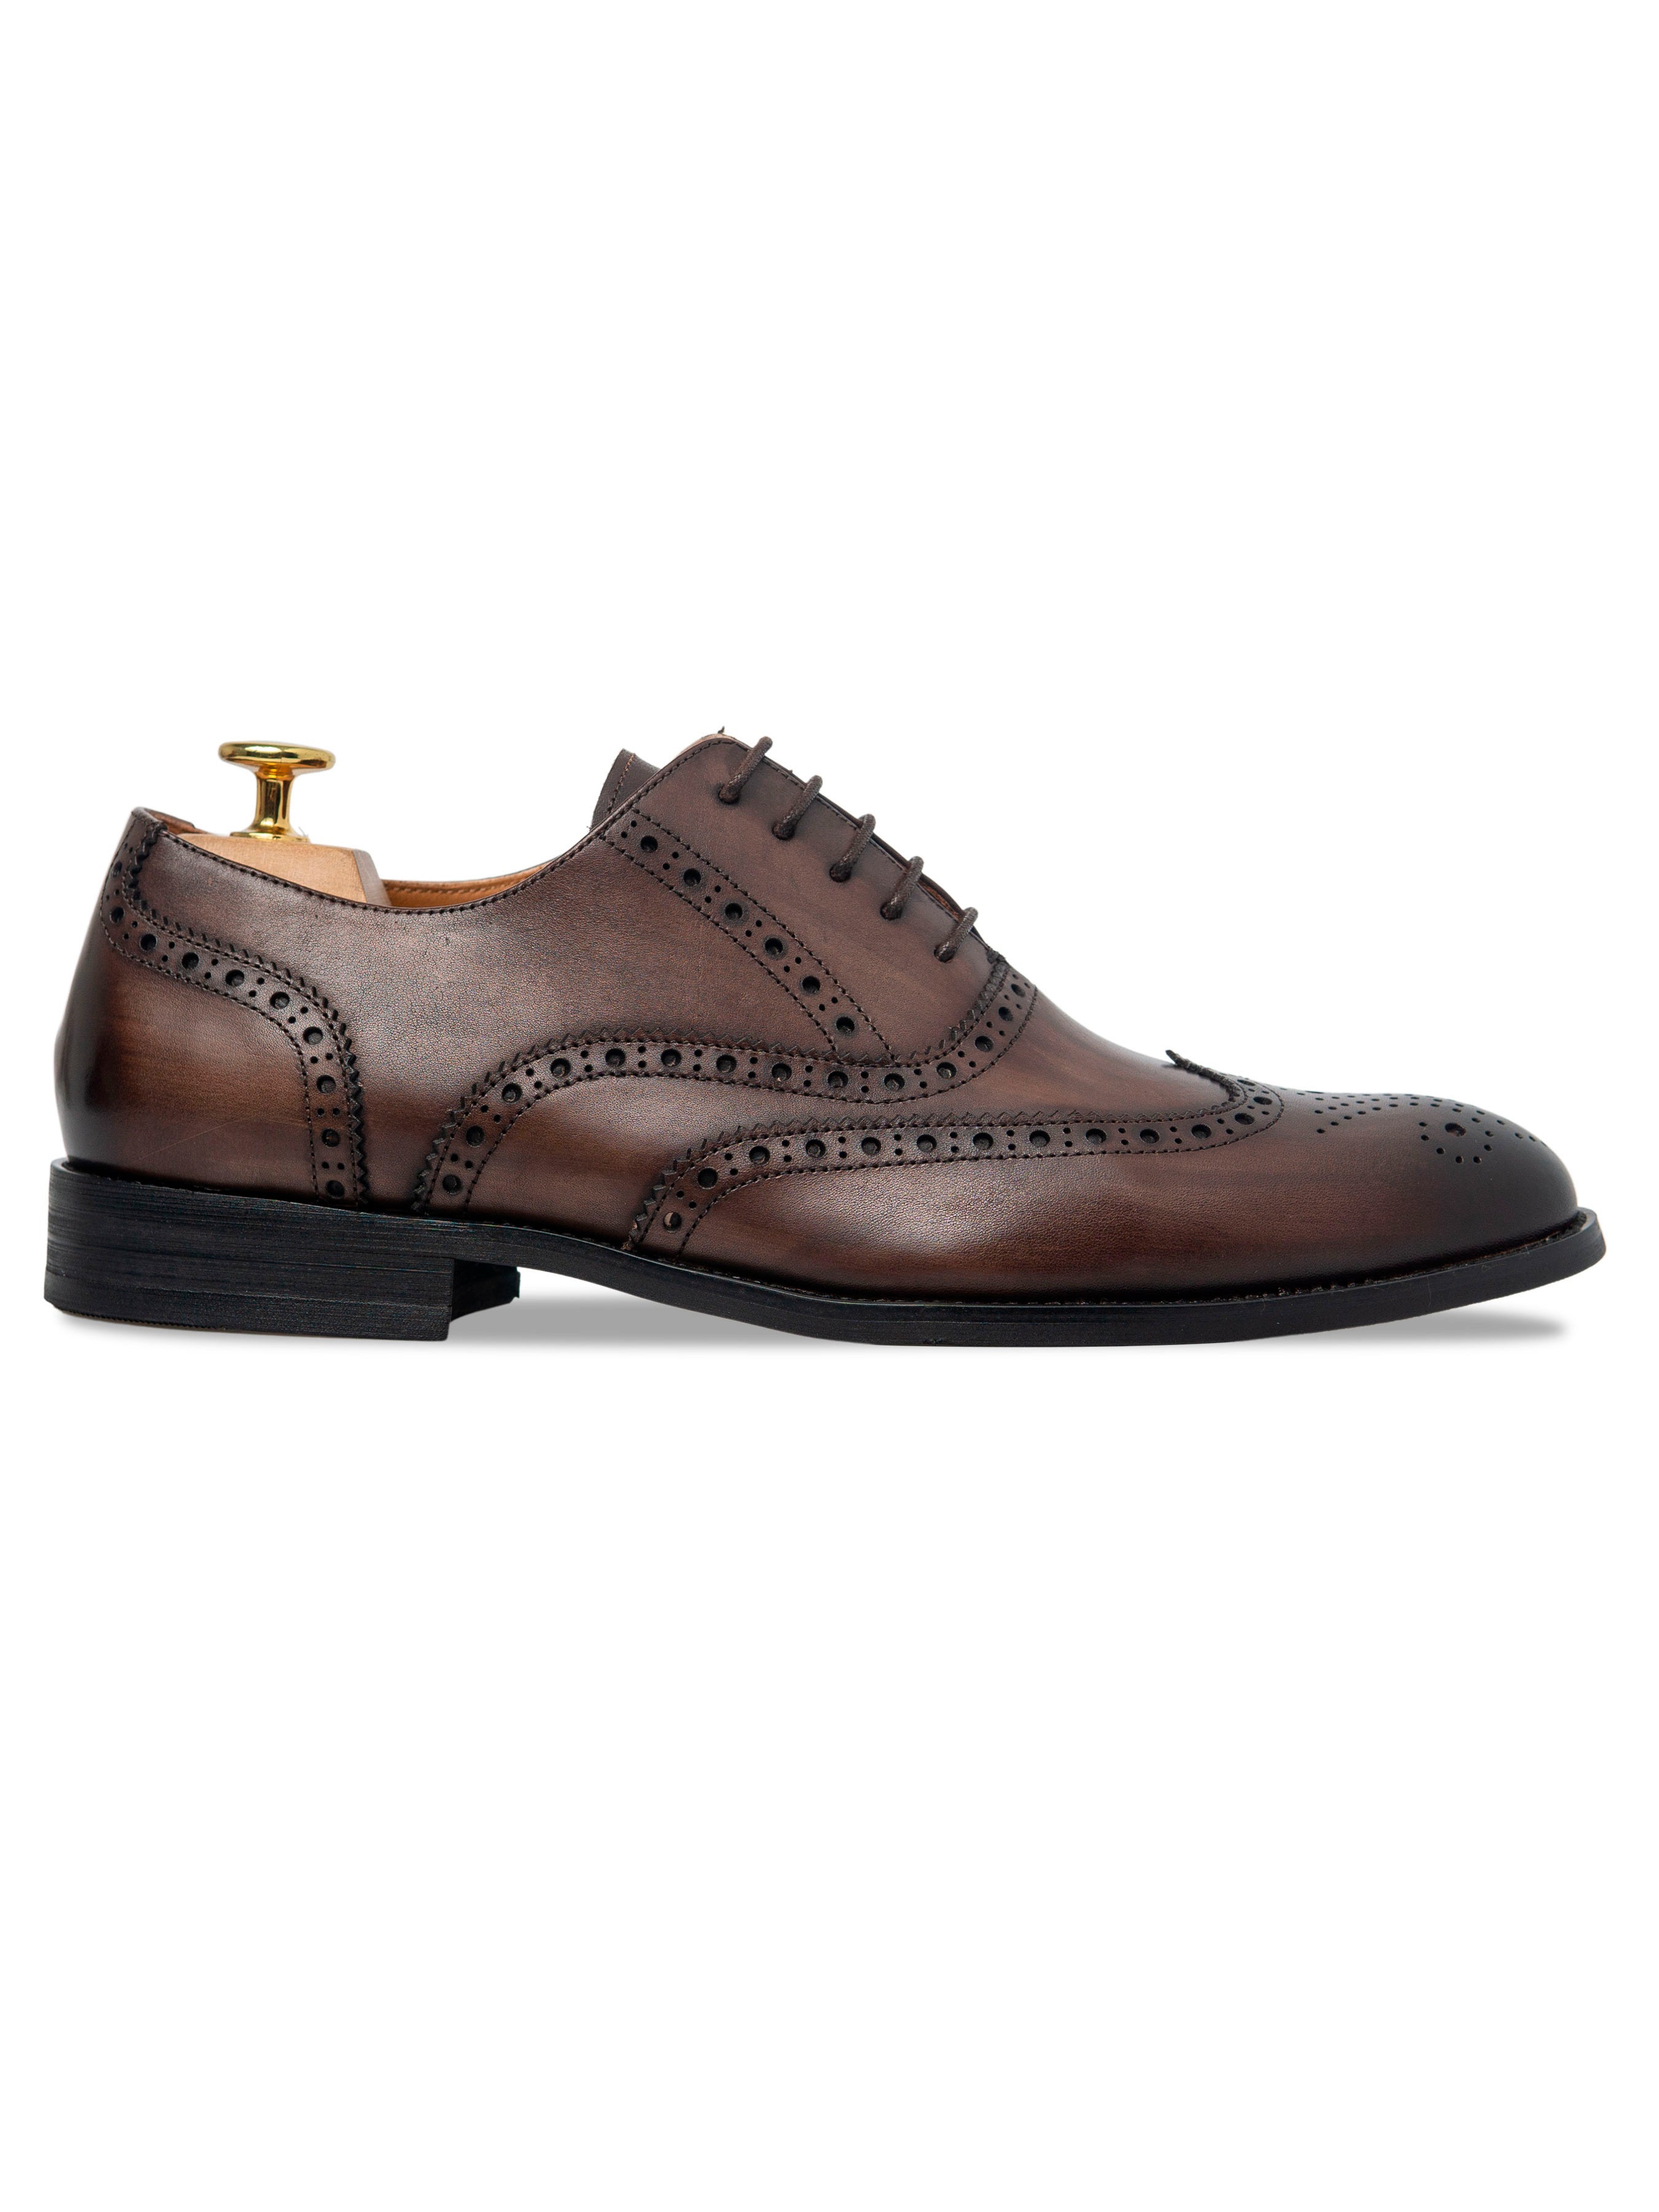 Classic Oxford Brogue Wingtip - Dark Brown Lace Up (Hand Painted Patina)